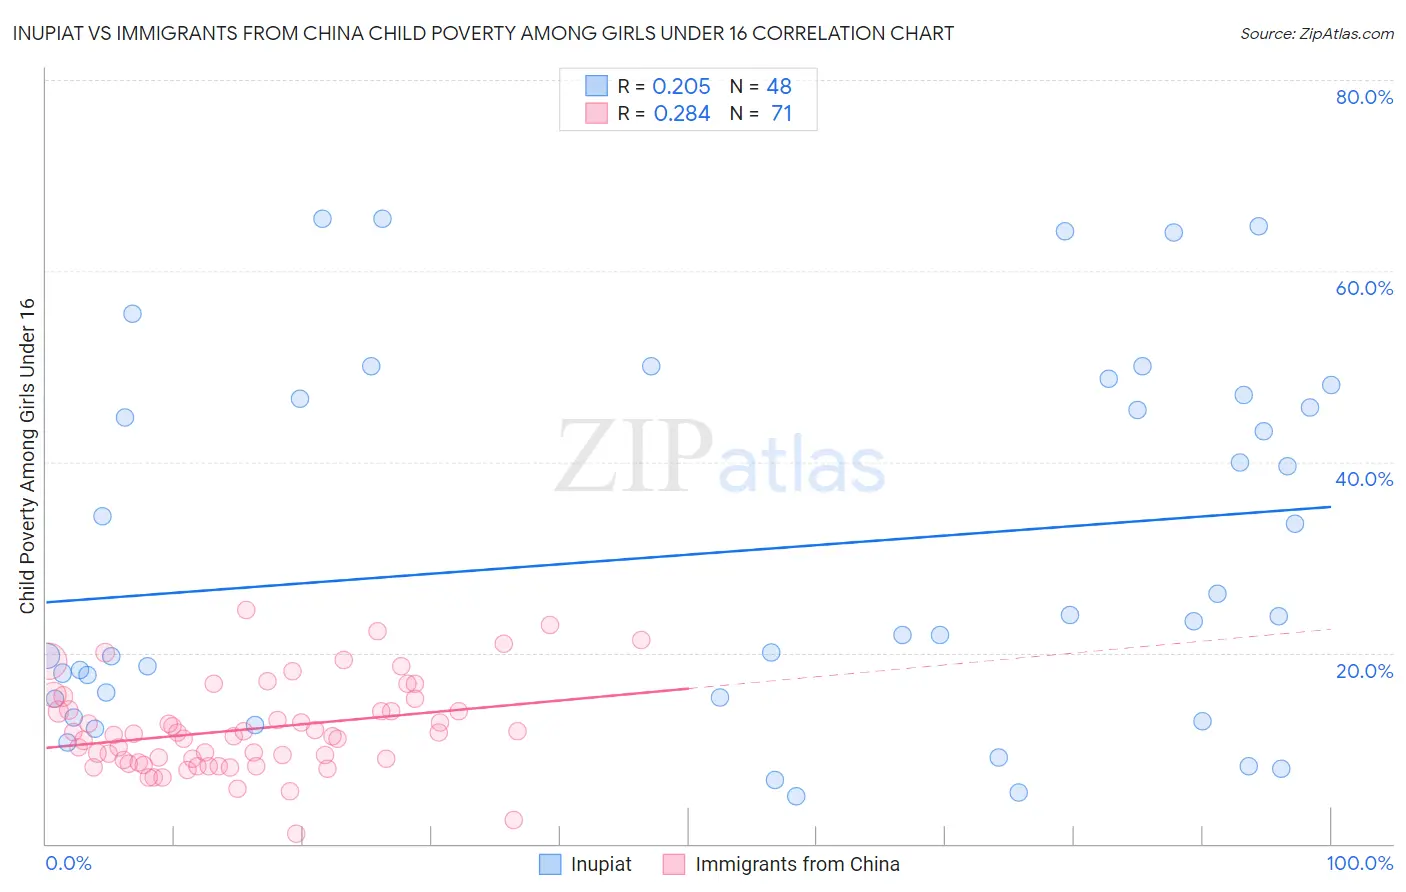 Inupiat vs Immigrants from China Child Poverty Among Girls Under 16